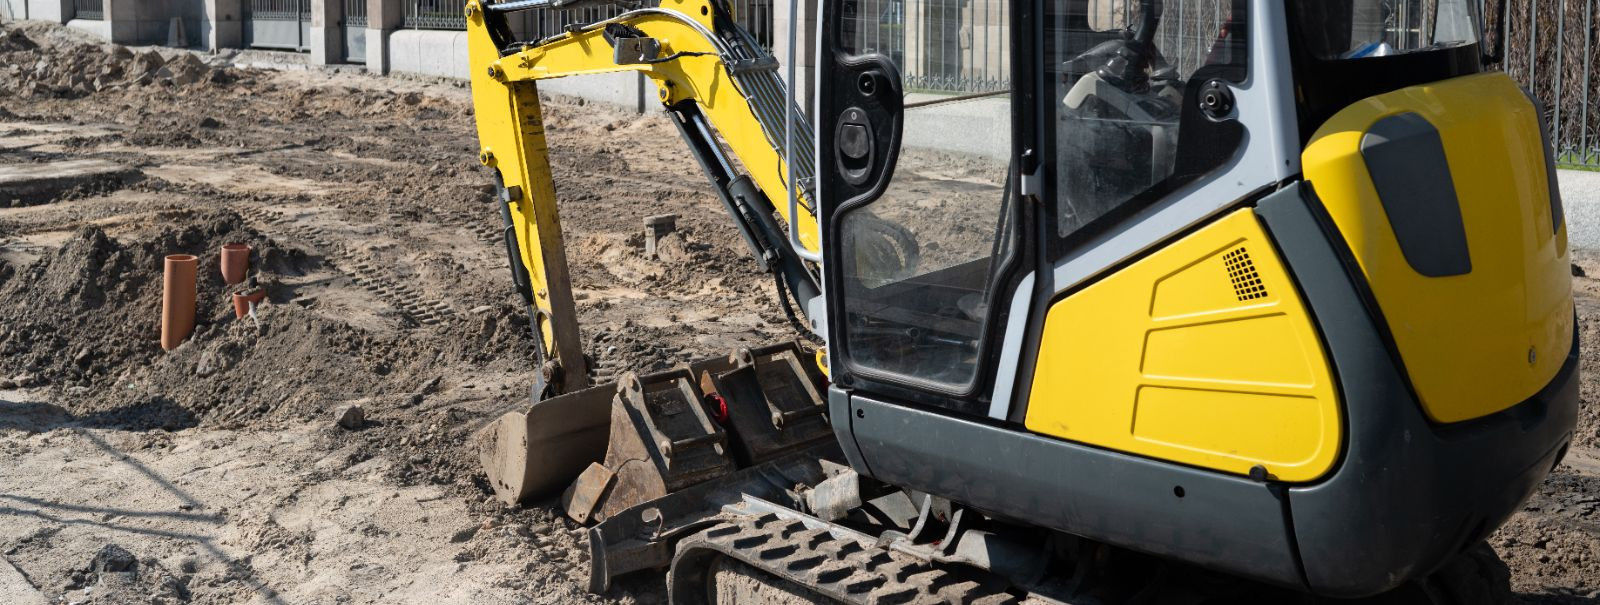 Mini excavators, also known as compact excavators, are small, yet powerful pieces of machinery designed for a variety of tasks in construction and landscaping. 